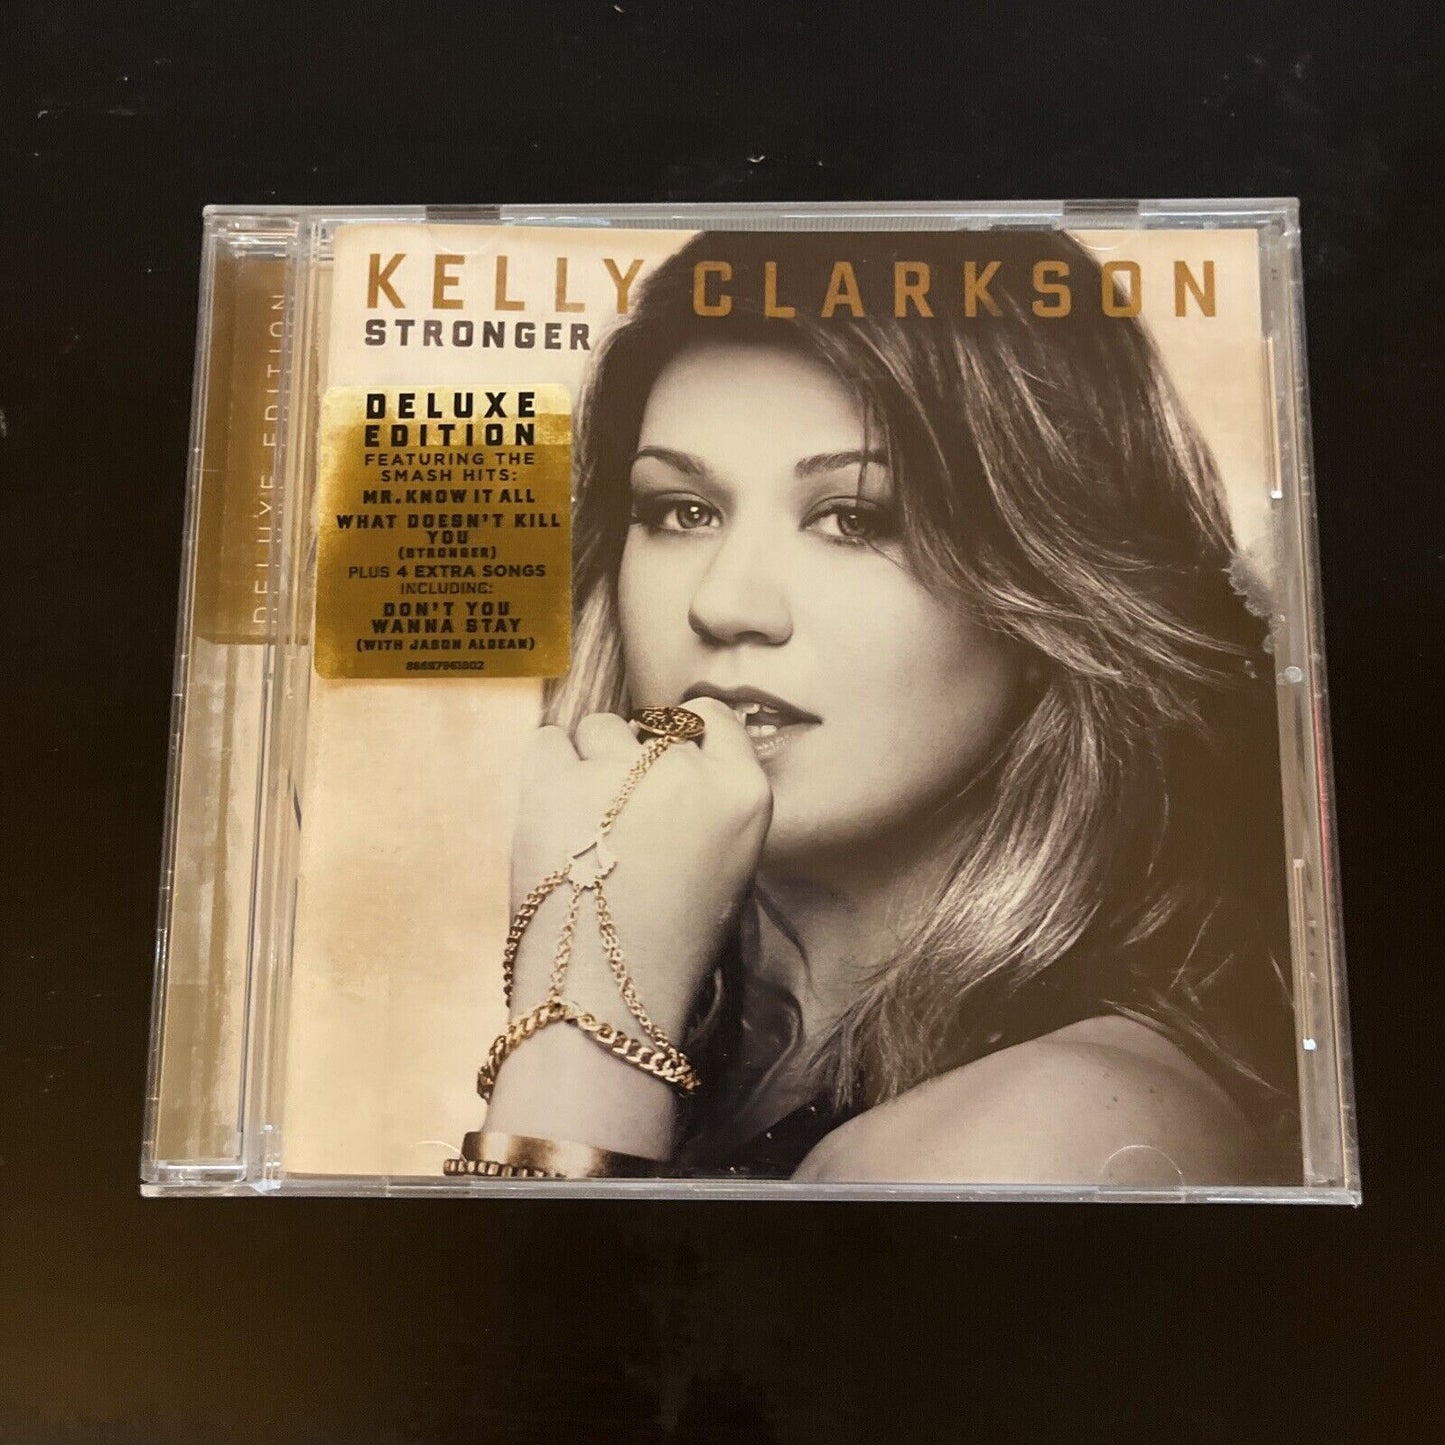 Kelly Clarkson – Stronger Deluxe Edition (CD, 2011)